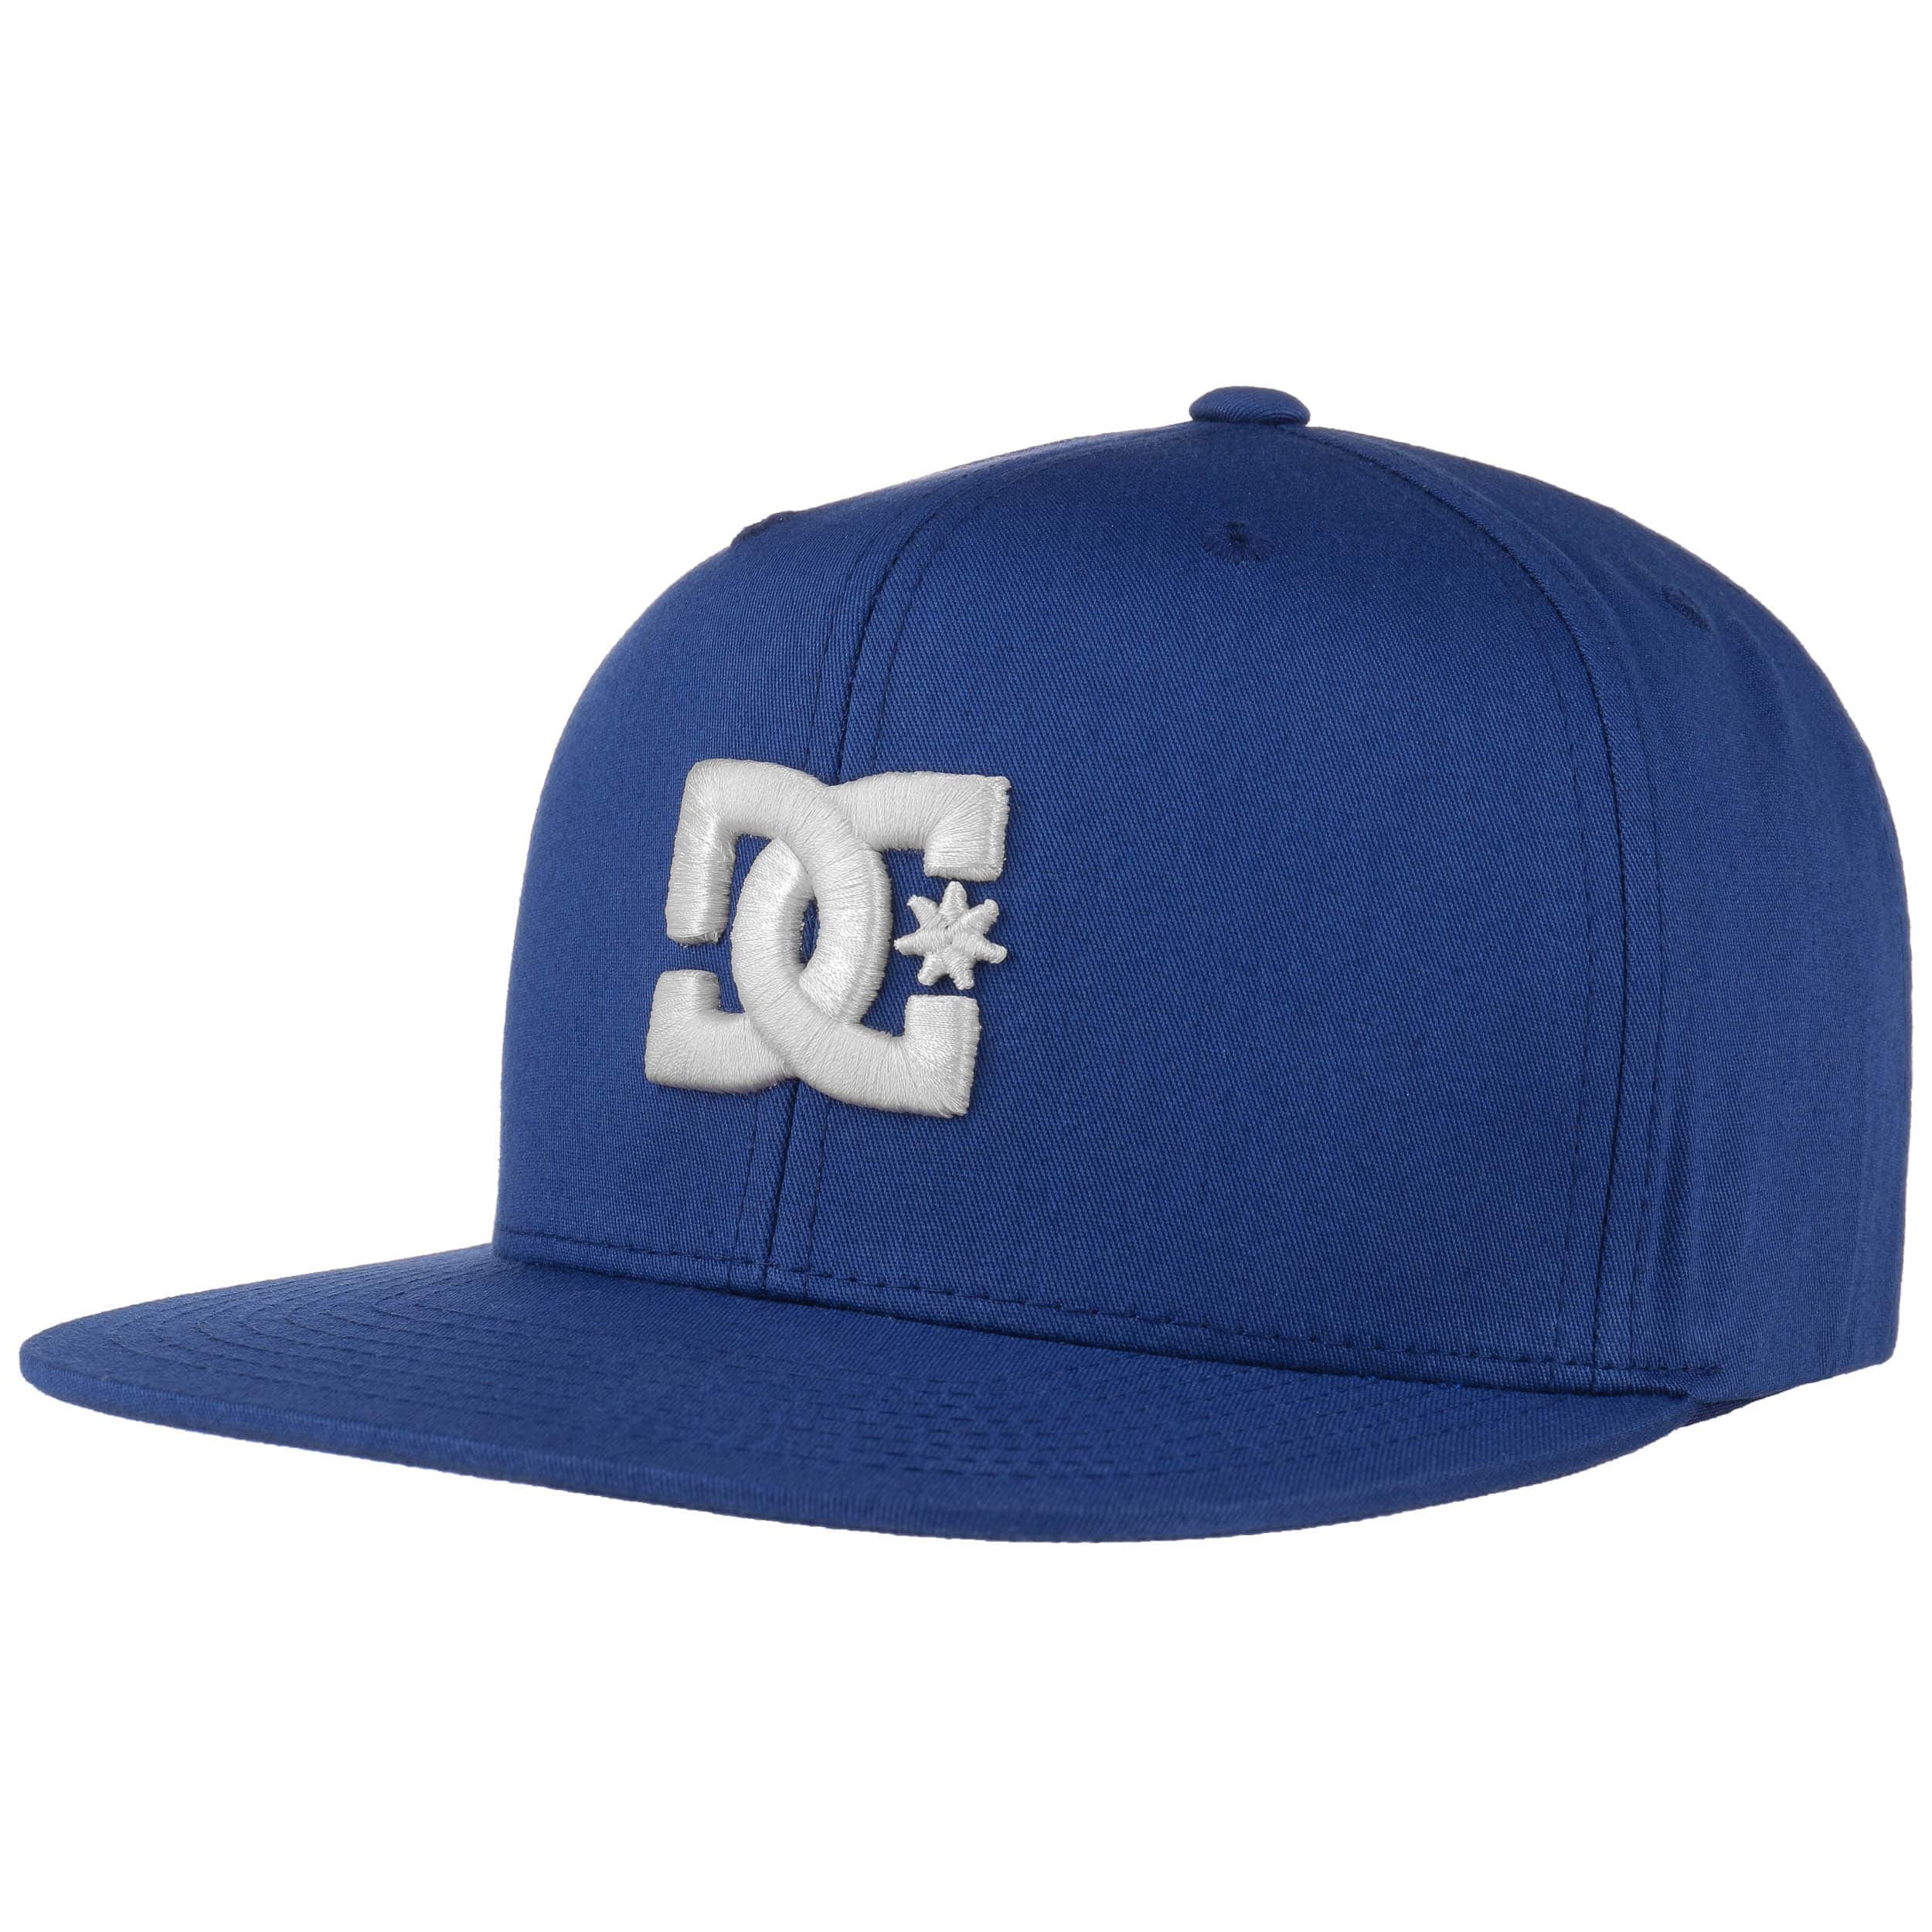 Snappy Snapback Cap by DC Shoes Co - 26,95 €